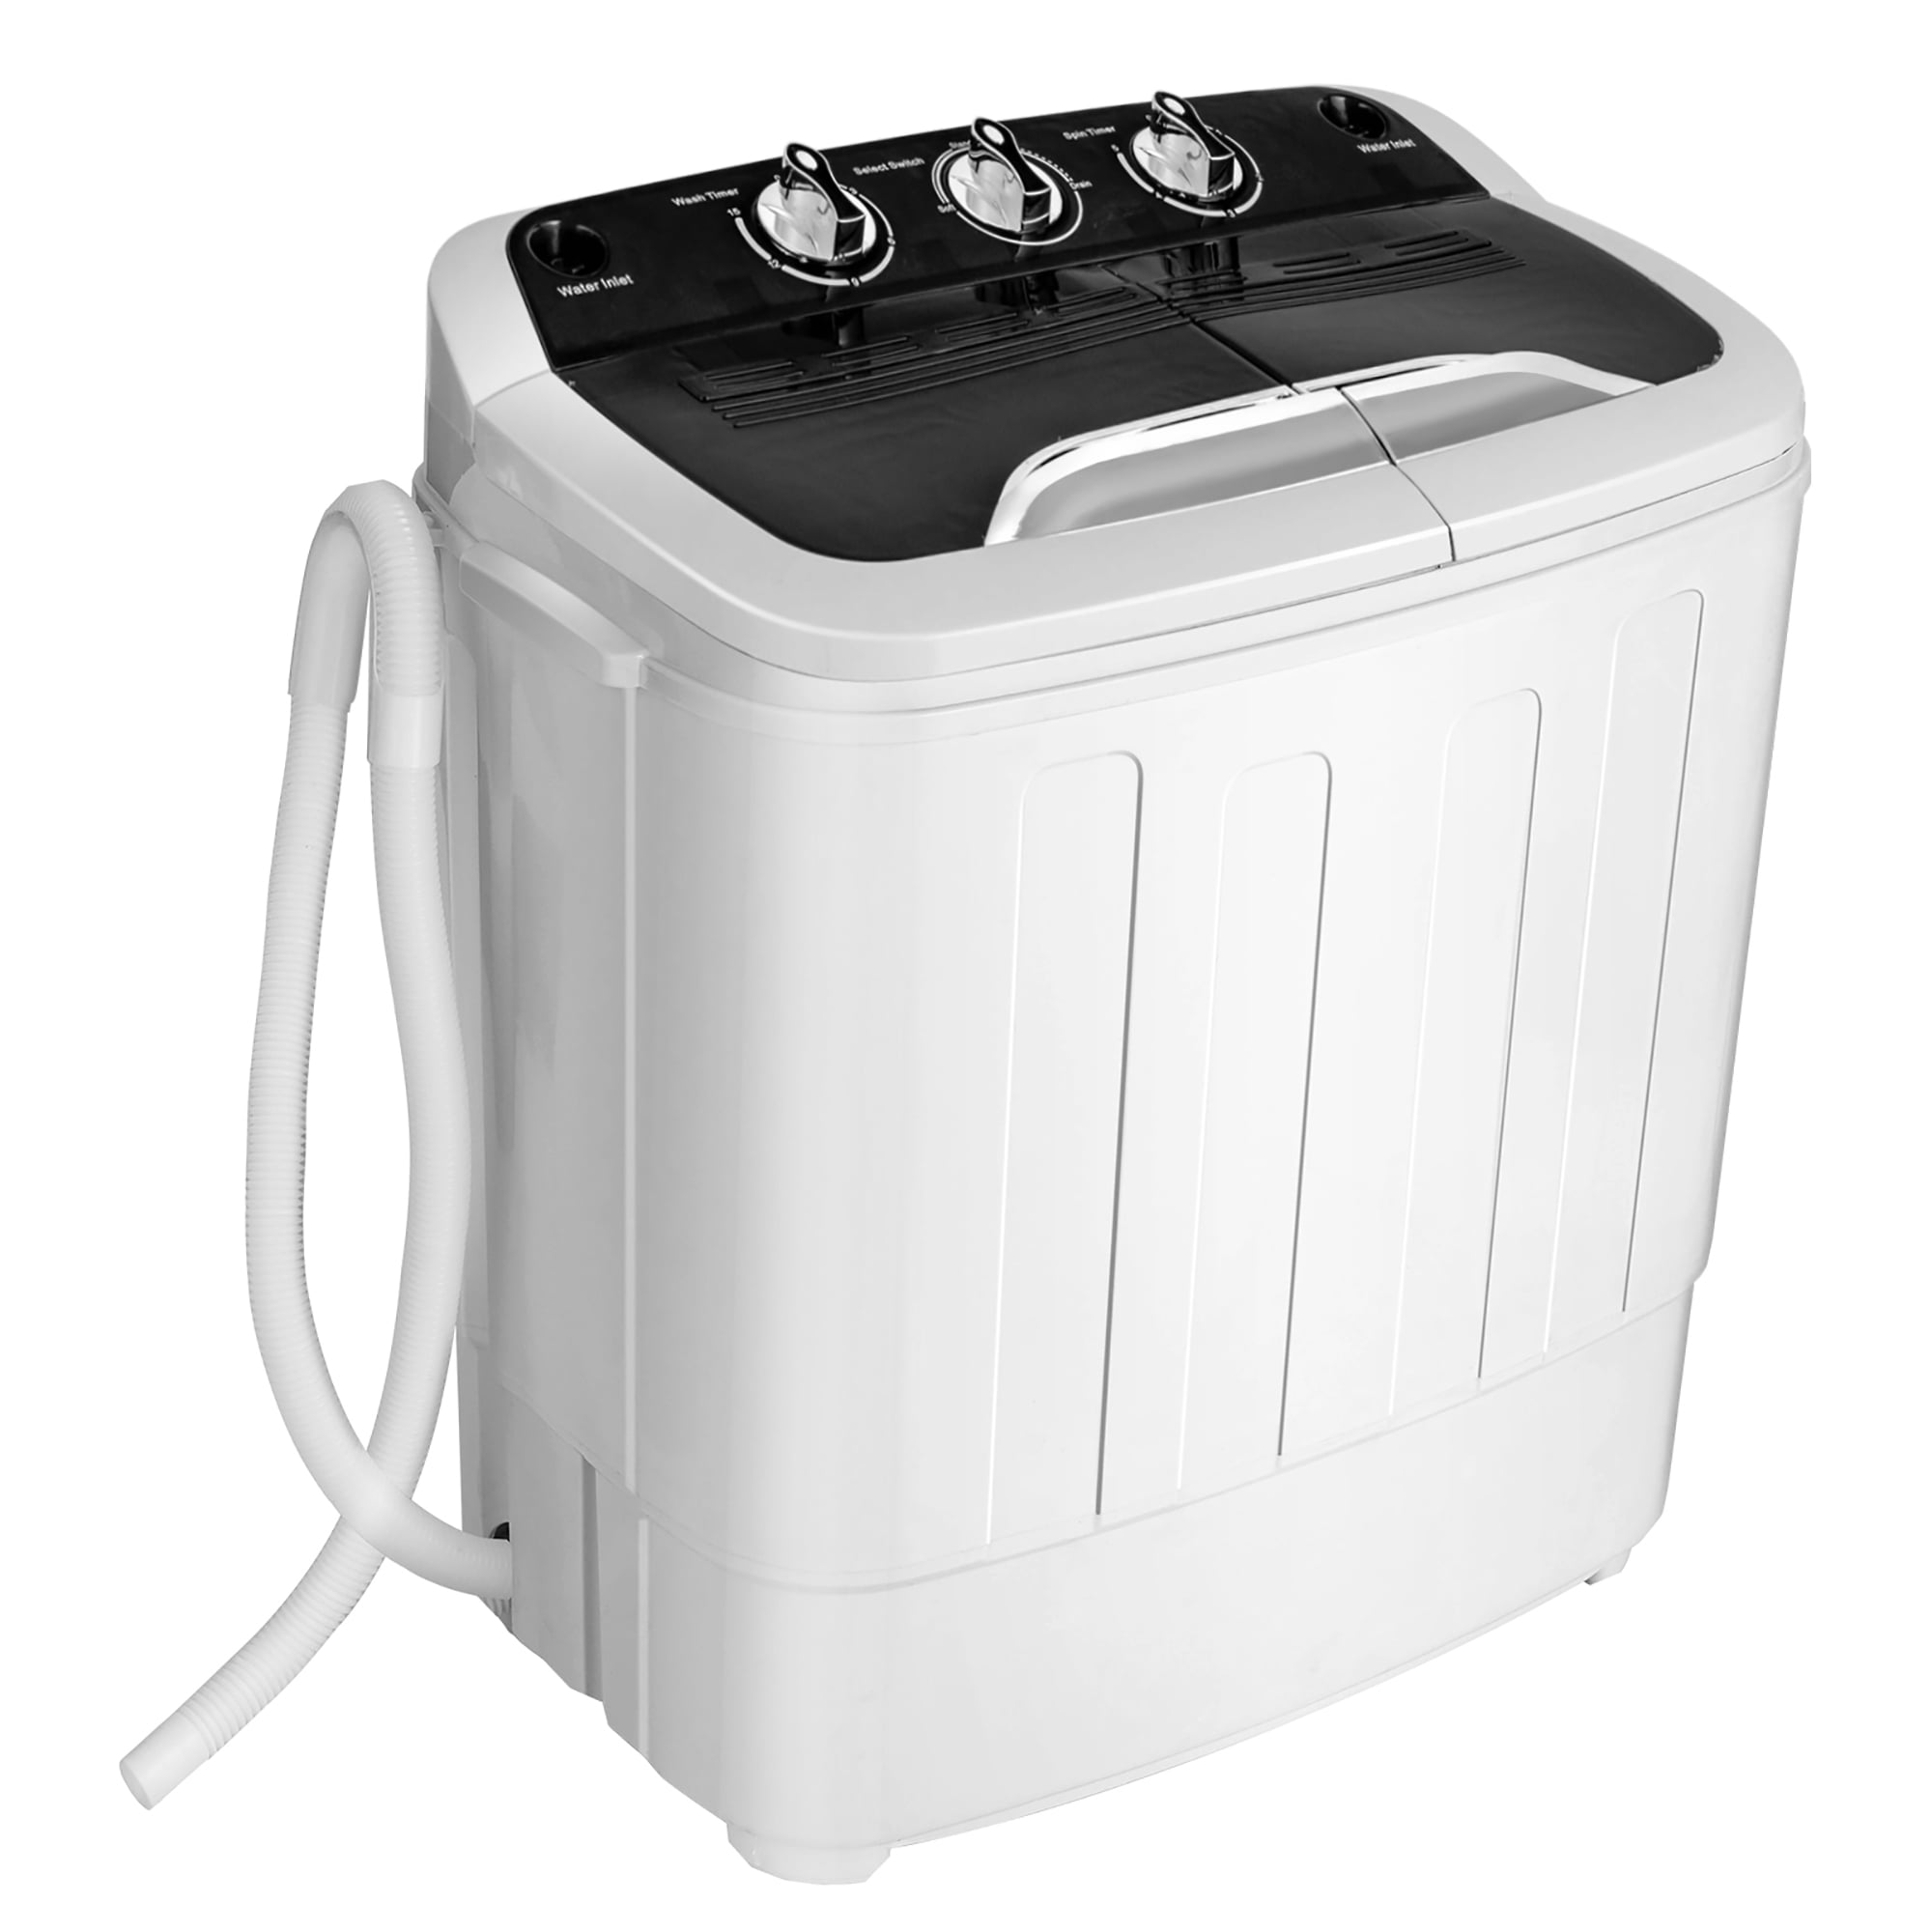 ROVSUN Compact Twin Tub Portable Mini Washing Machine 26lbs Capacity & Spiner / Built-in Drain Pump/Semi-Automatic for Camping Washer Apartments Blue 18lbs 8lbs Dorms & RV’s 